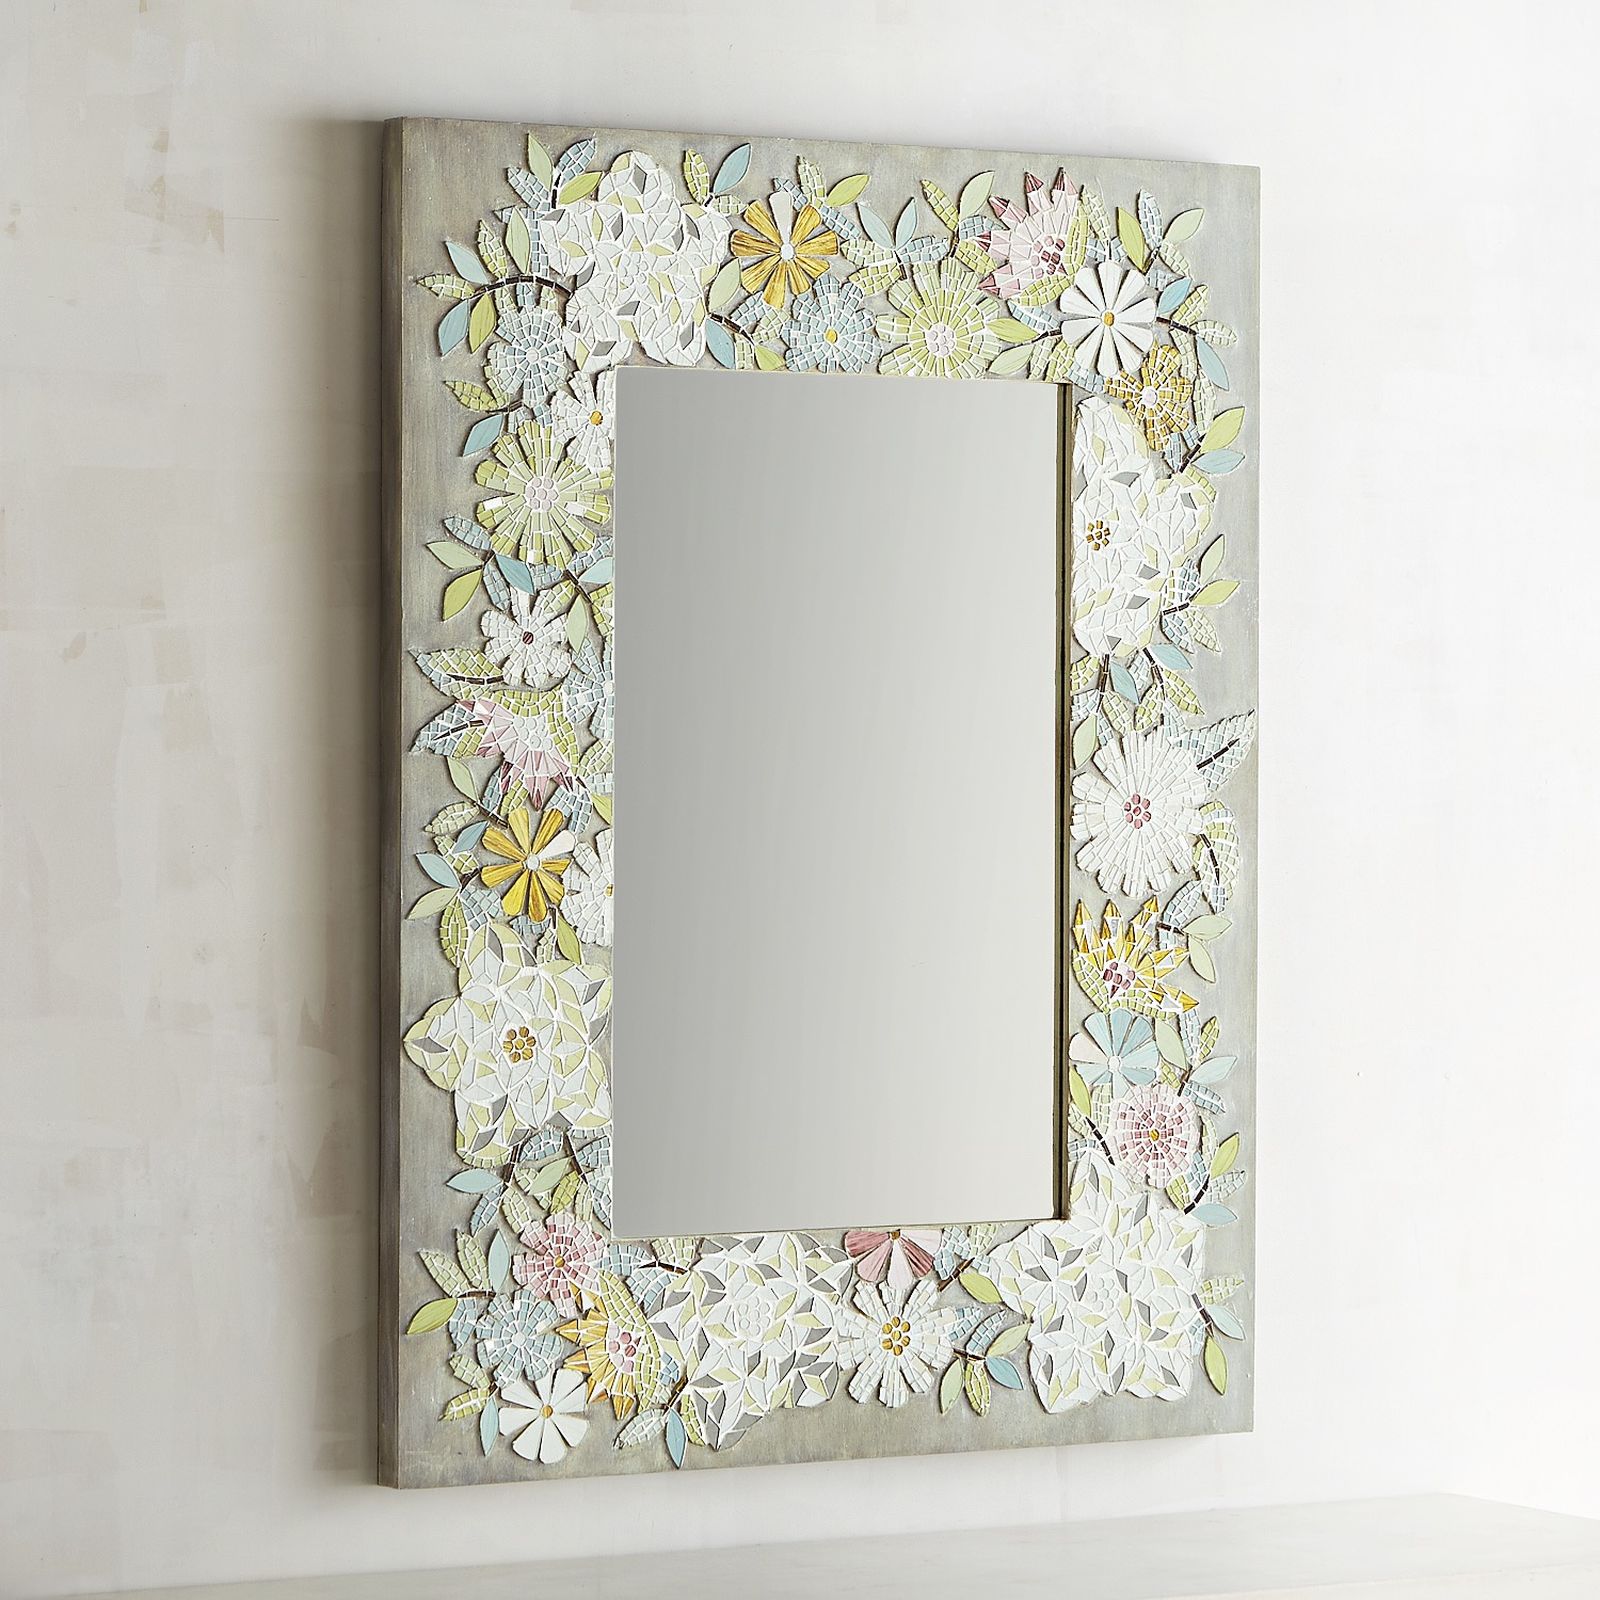 Fl Mosaic Mirrors From Pier1, Mirrors Pier One Imports